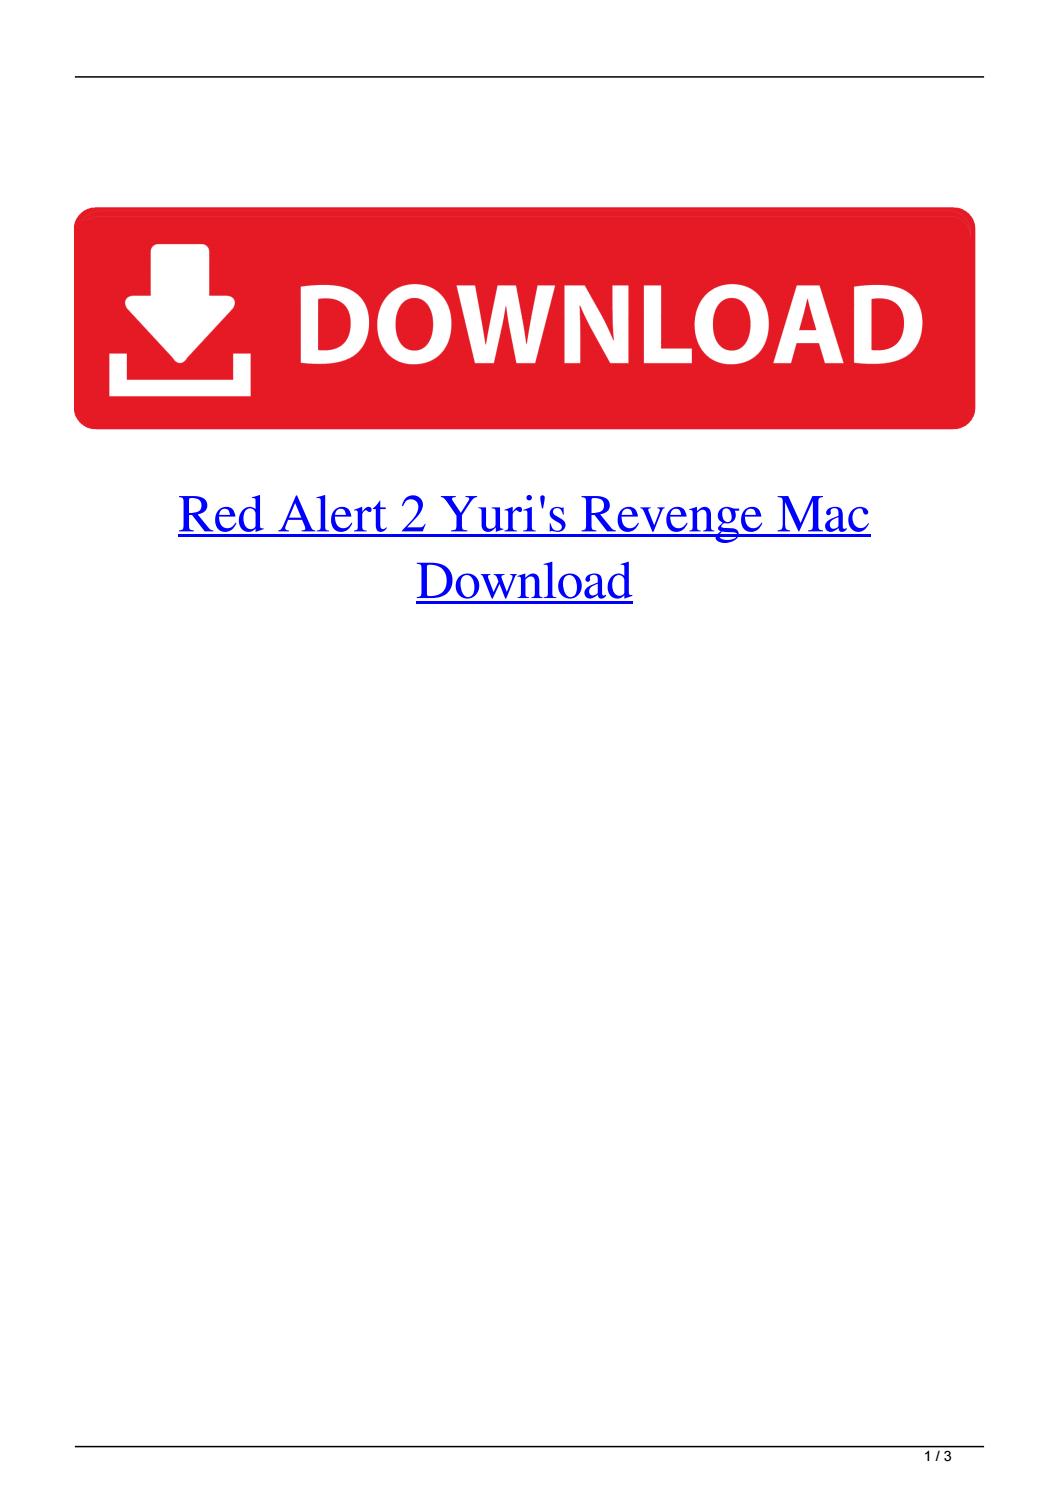 Red Alert download the last version for windows